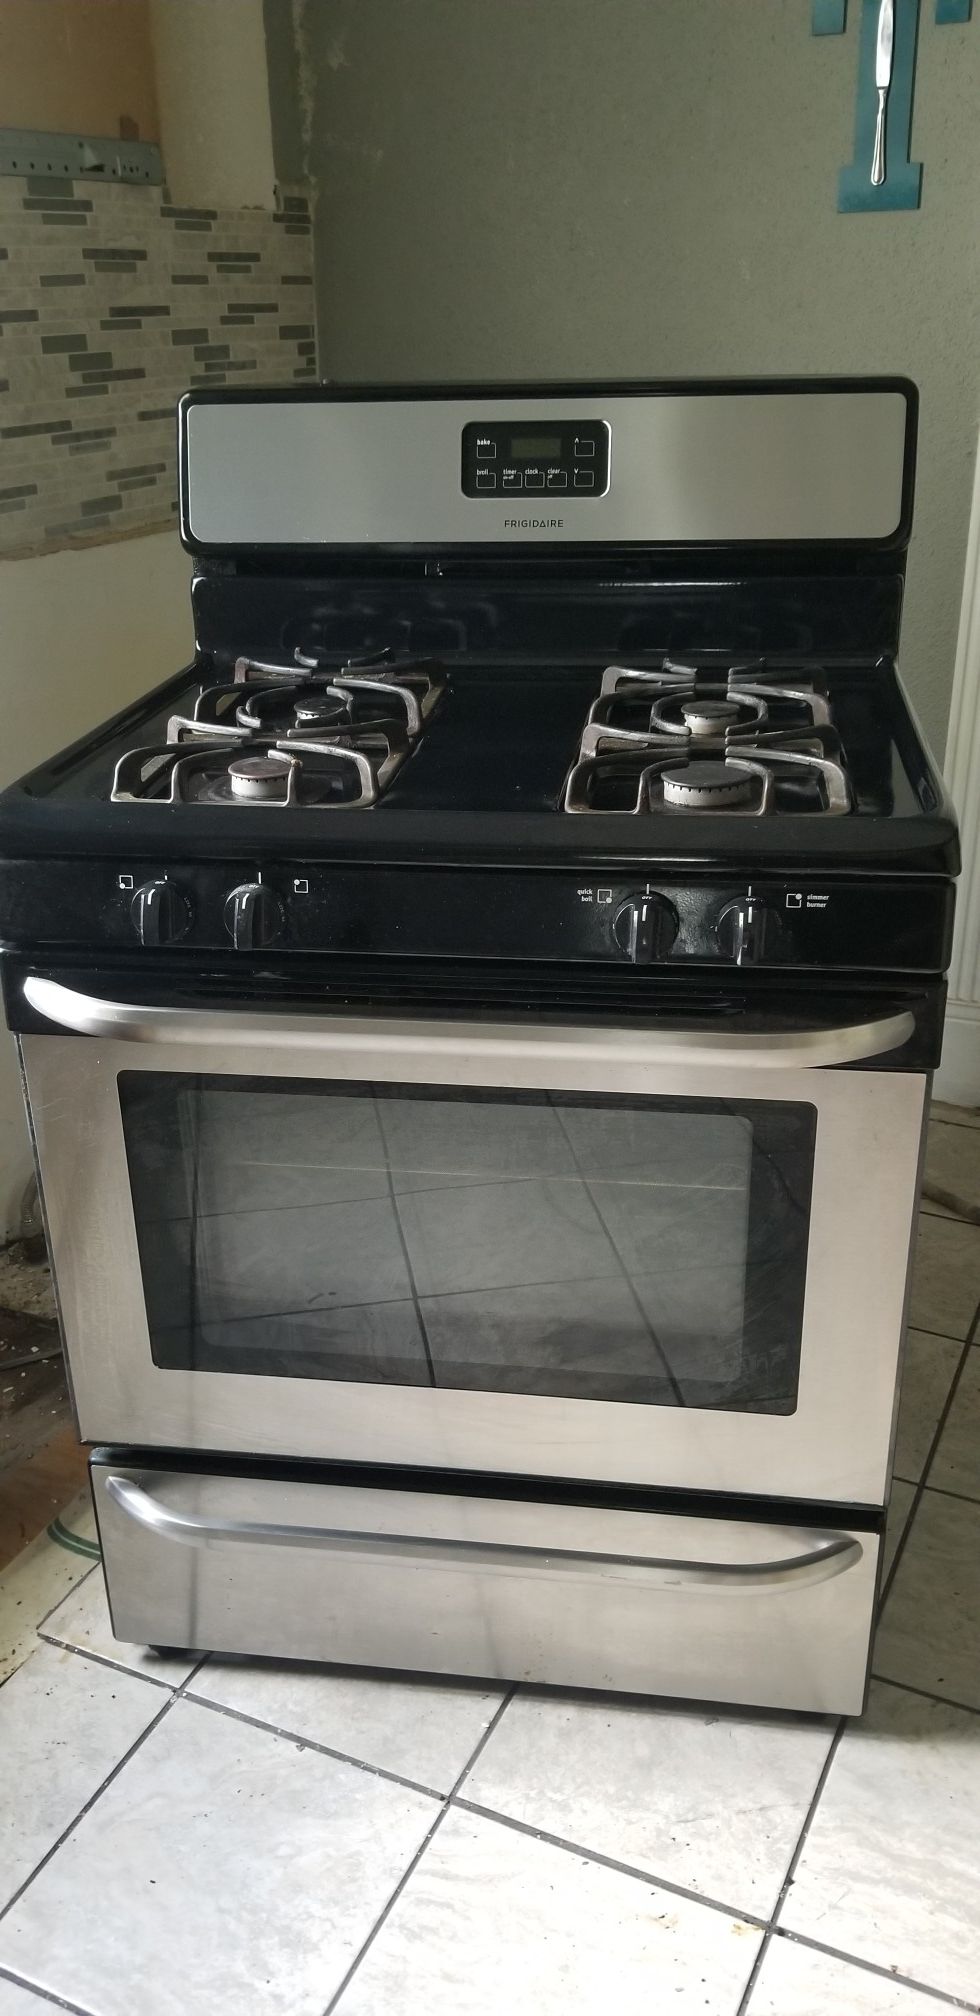 GAS STOVE, MICROWAVE AND DISHWASHER